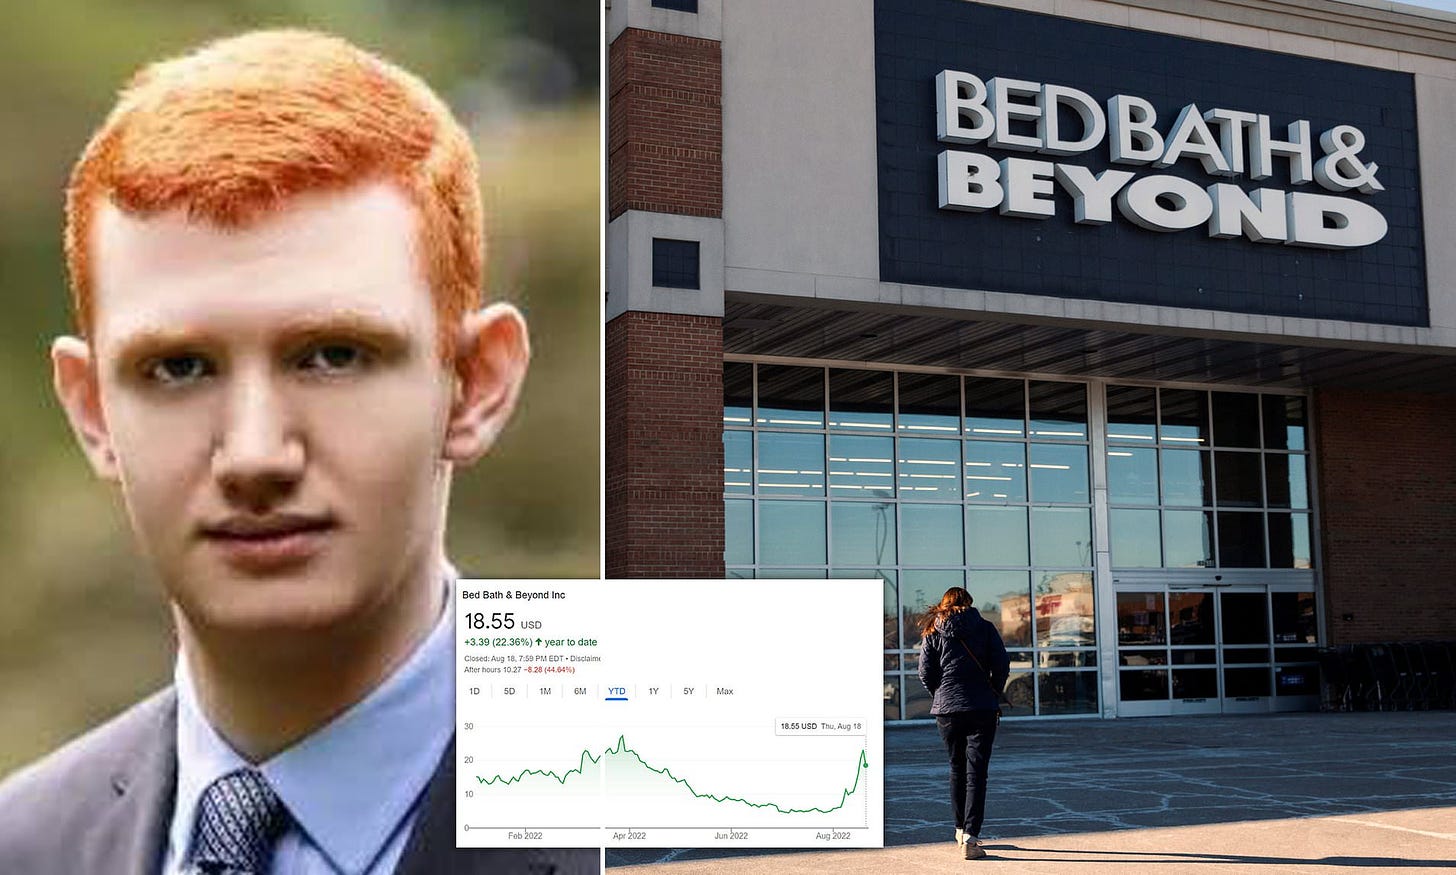 USC math student, 20, makes $110million selling Bed Bath & Beyond's  meme-stock | Daily Mail Online